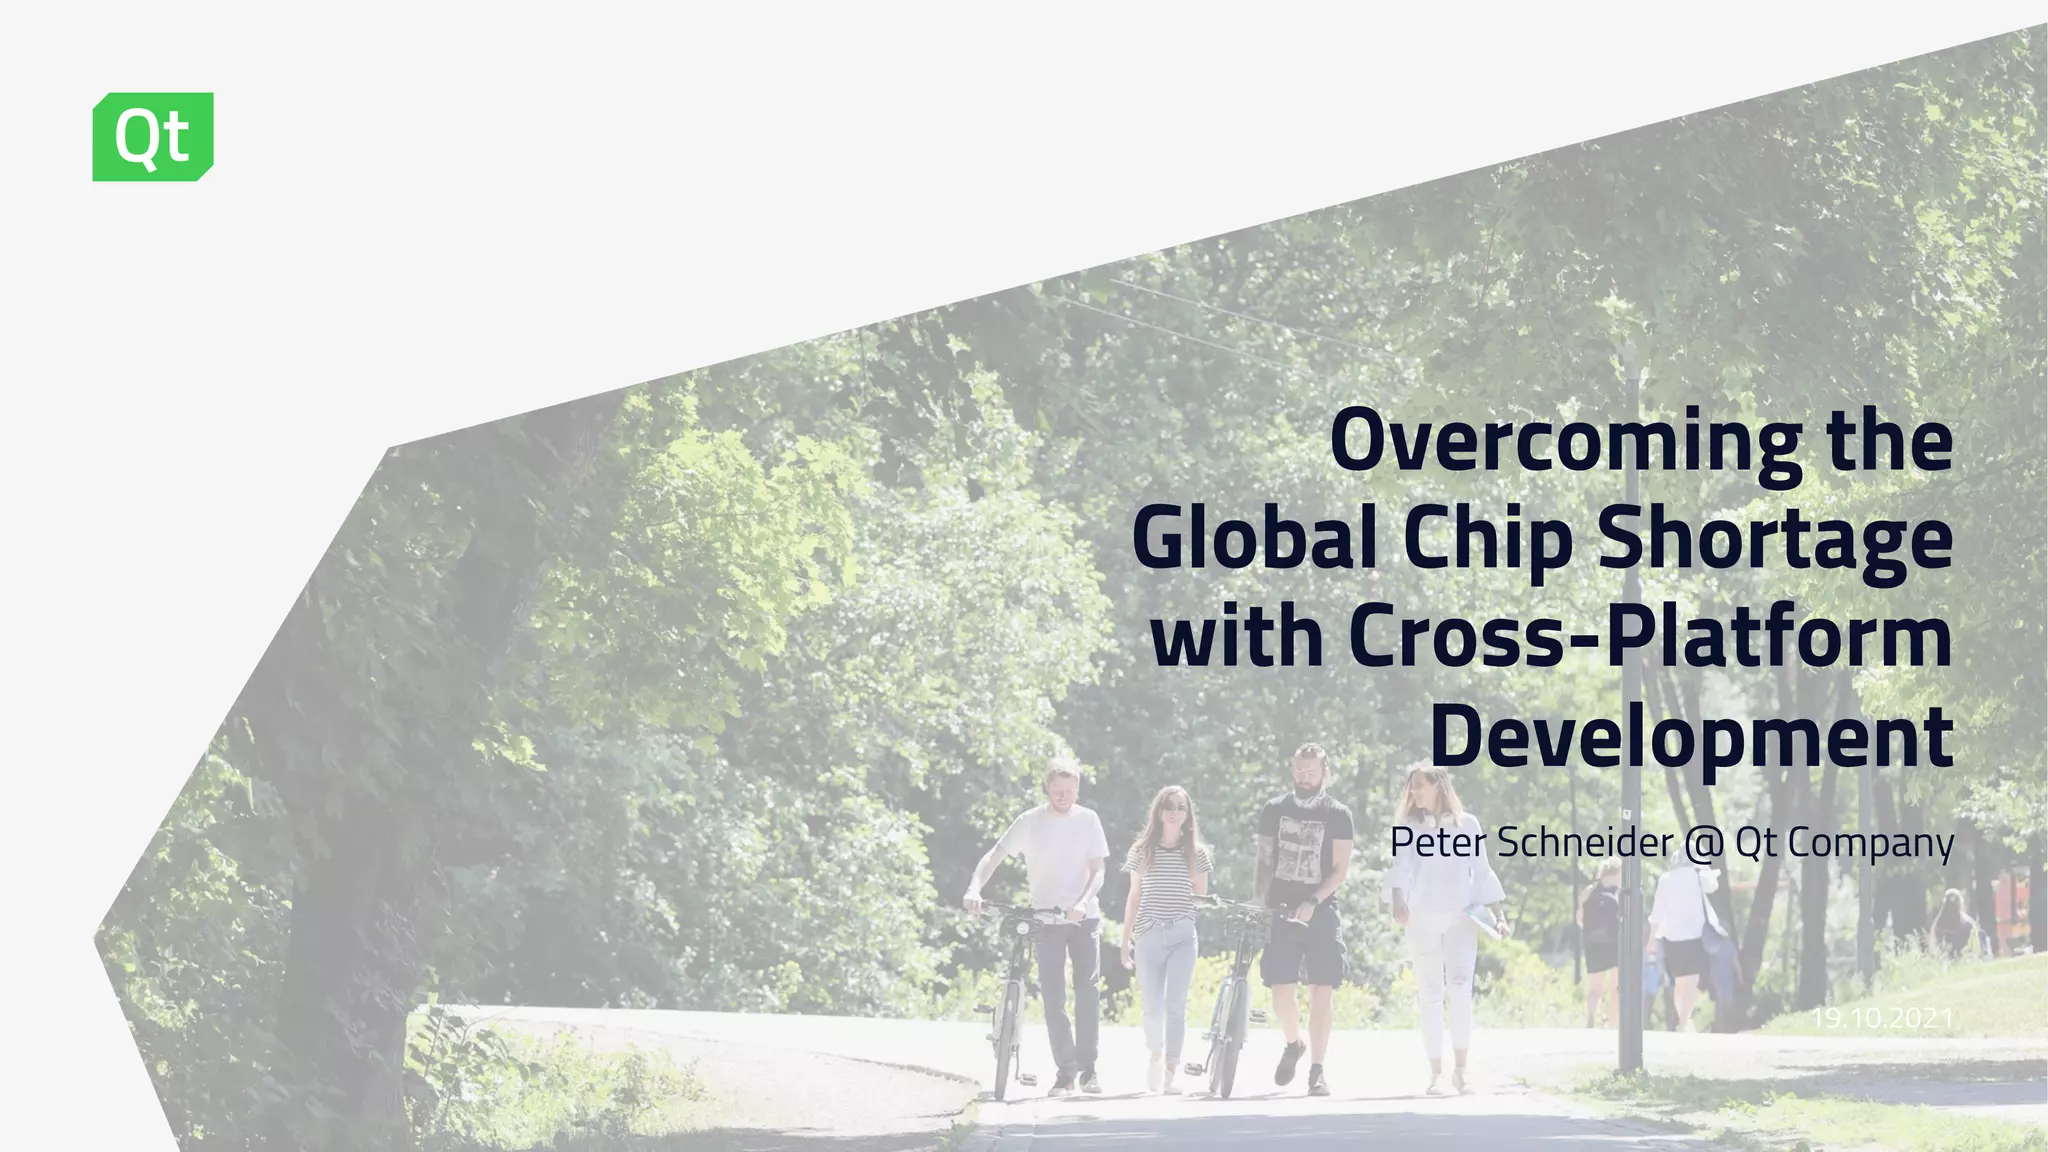 How are Companies Overcoming the Global Chip Shortage